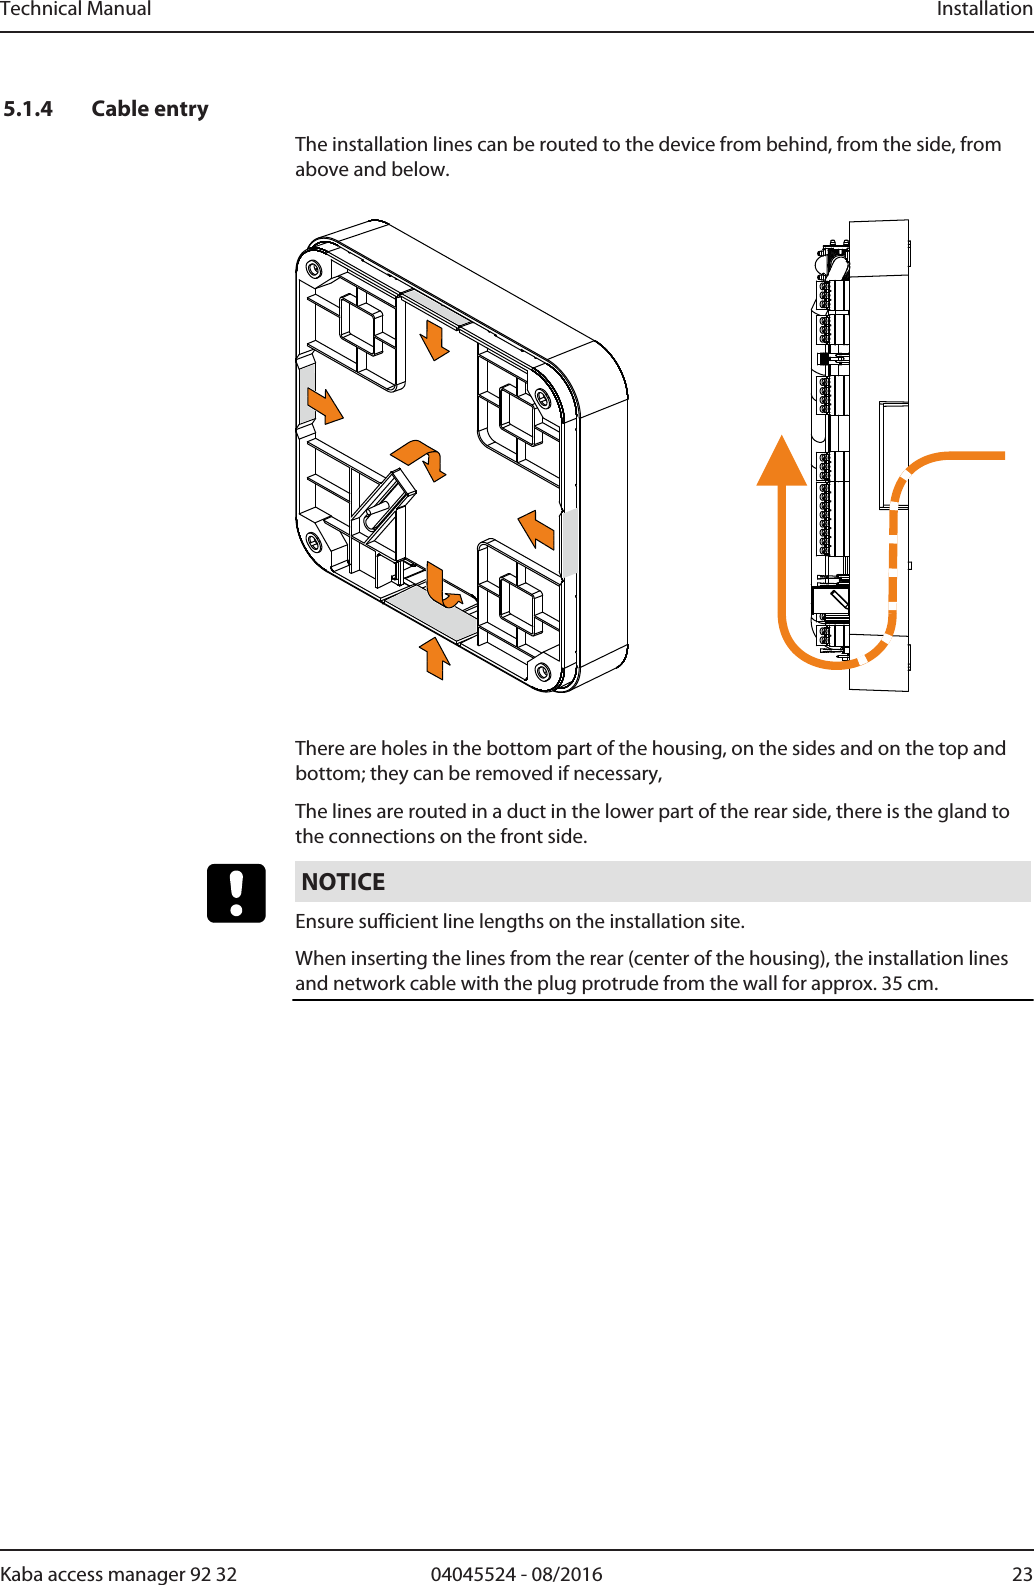 Technical Manual Installation2304045524 - 08/2016Kaba access manager 92 325.1.4 Cable entryThe installation lines can be routed to the device from behind, from the side, fromabove and below.There are holes in the bottom part of the housing, on the sides and on the top andbottom; they can be removed if necessary,The lines are routed in a duct in the lower part of the rear side, there is the gland tothe connections on the front side.NOTICEEnsure sufficient line lengths on the installation site.When inserting the lines from the rear (center of the housing), the installation linesand network cable with the plug protrude from the wall for approx. 35 cm.